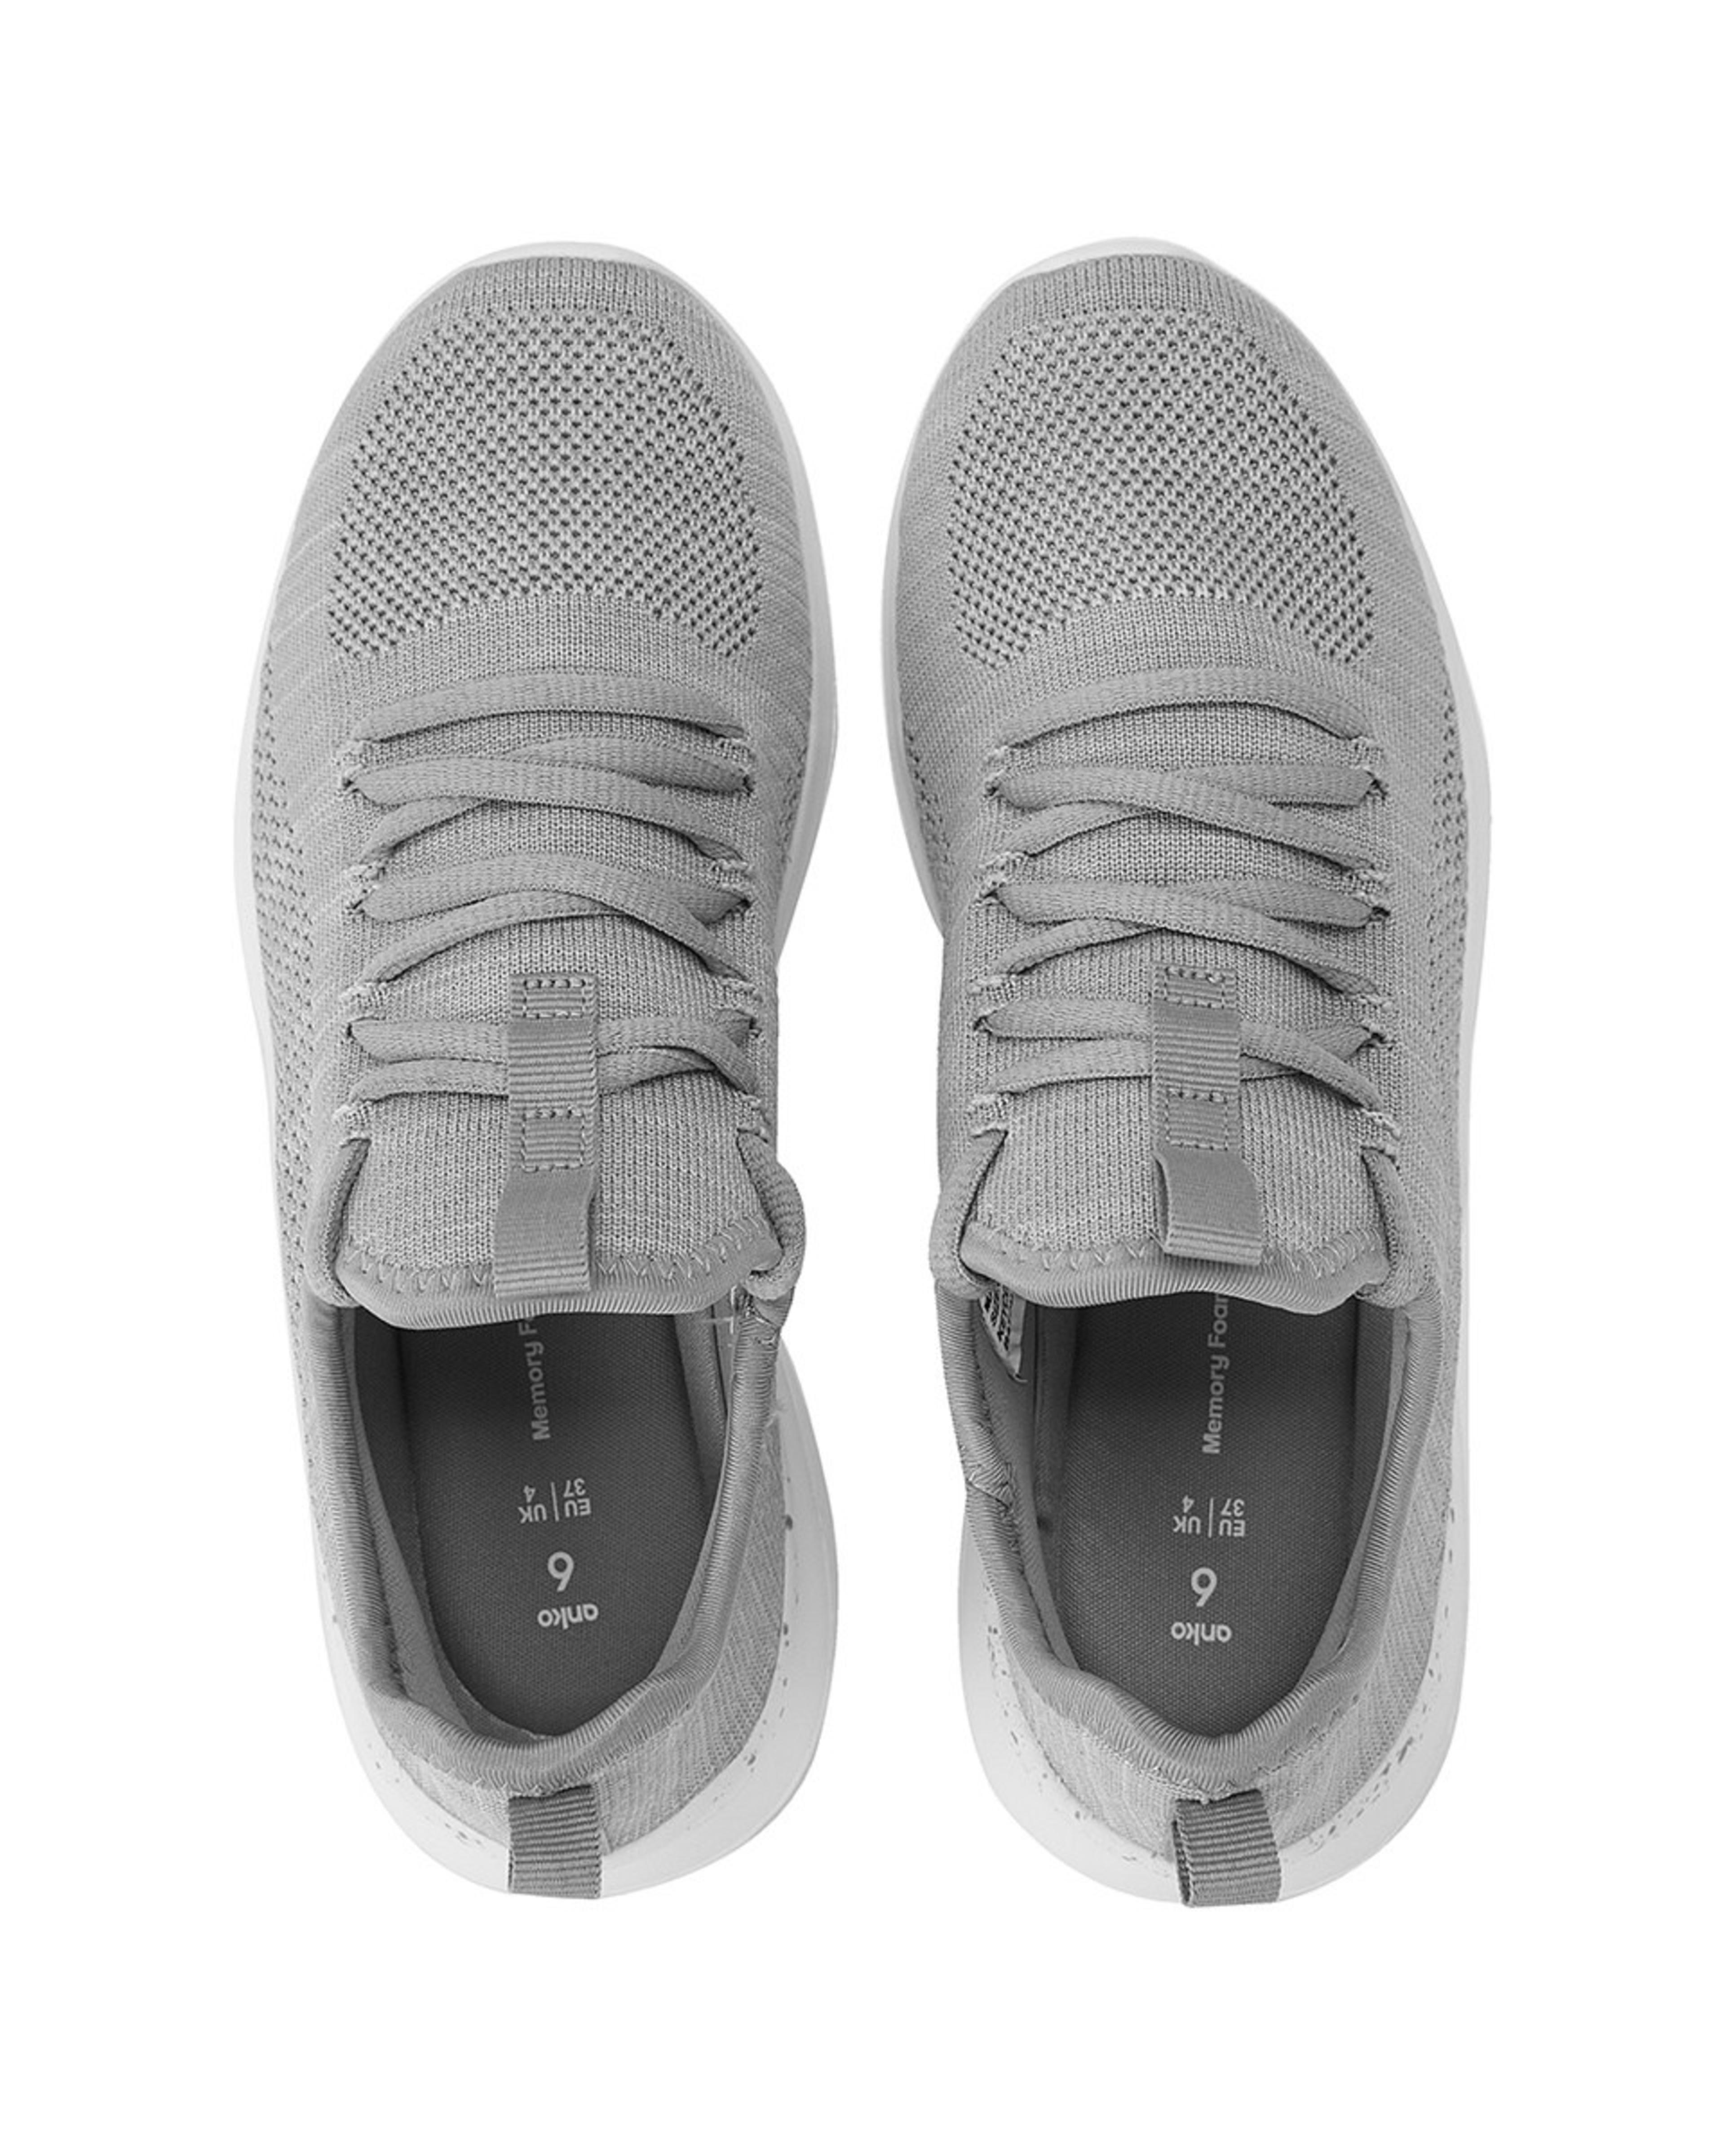 Lace Up Sneakers - Kmart